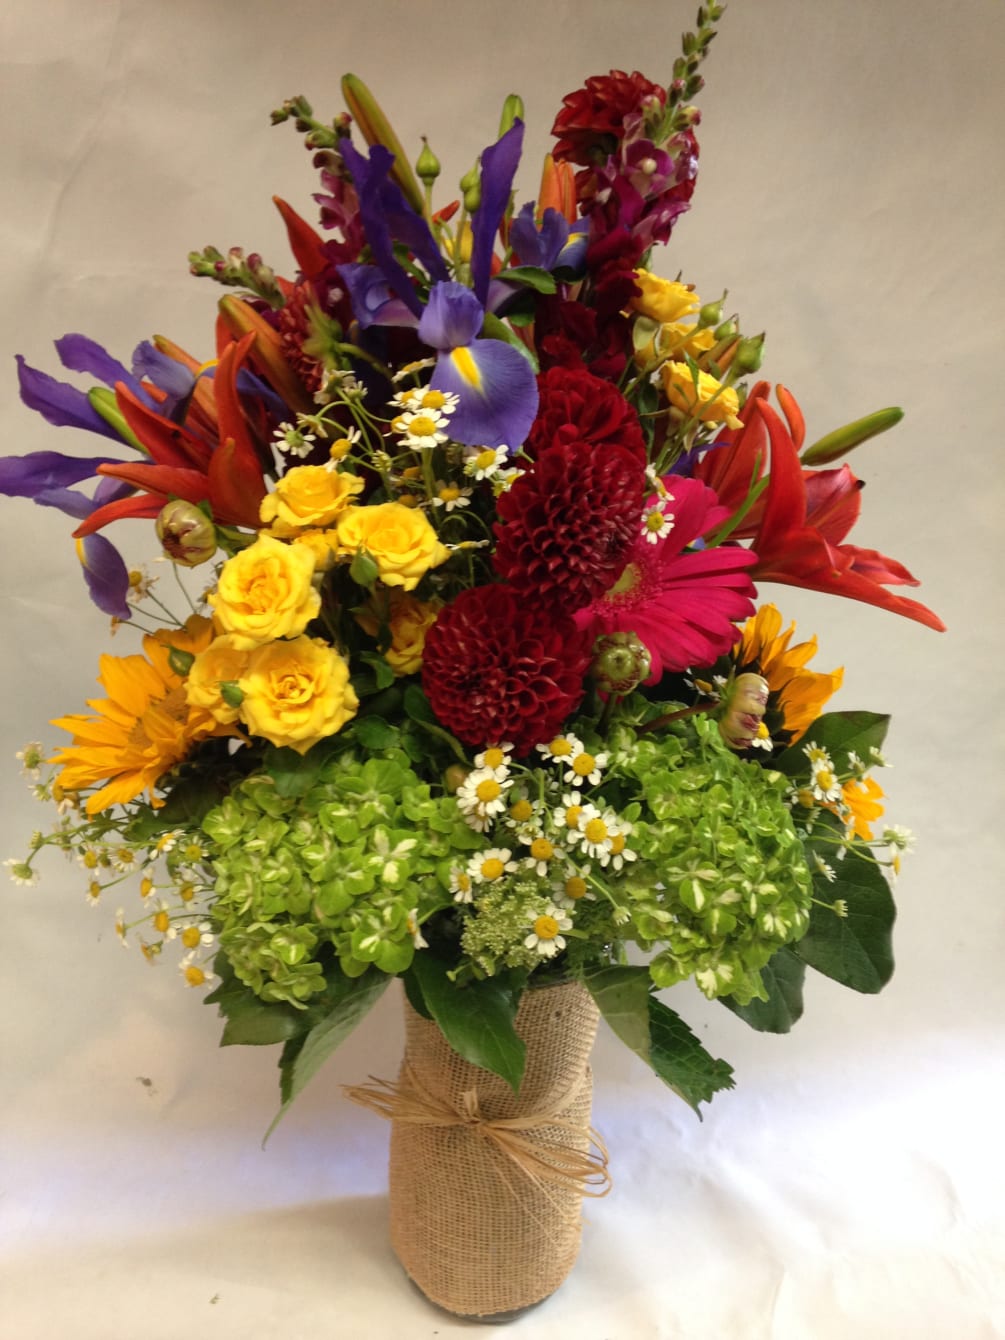 This bright and colorful arrangement comes complete with yellow spray roses, ball